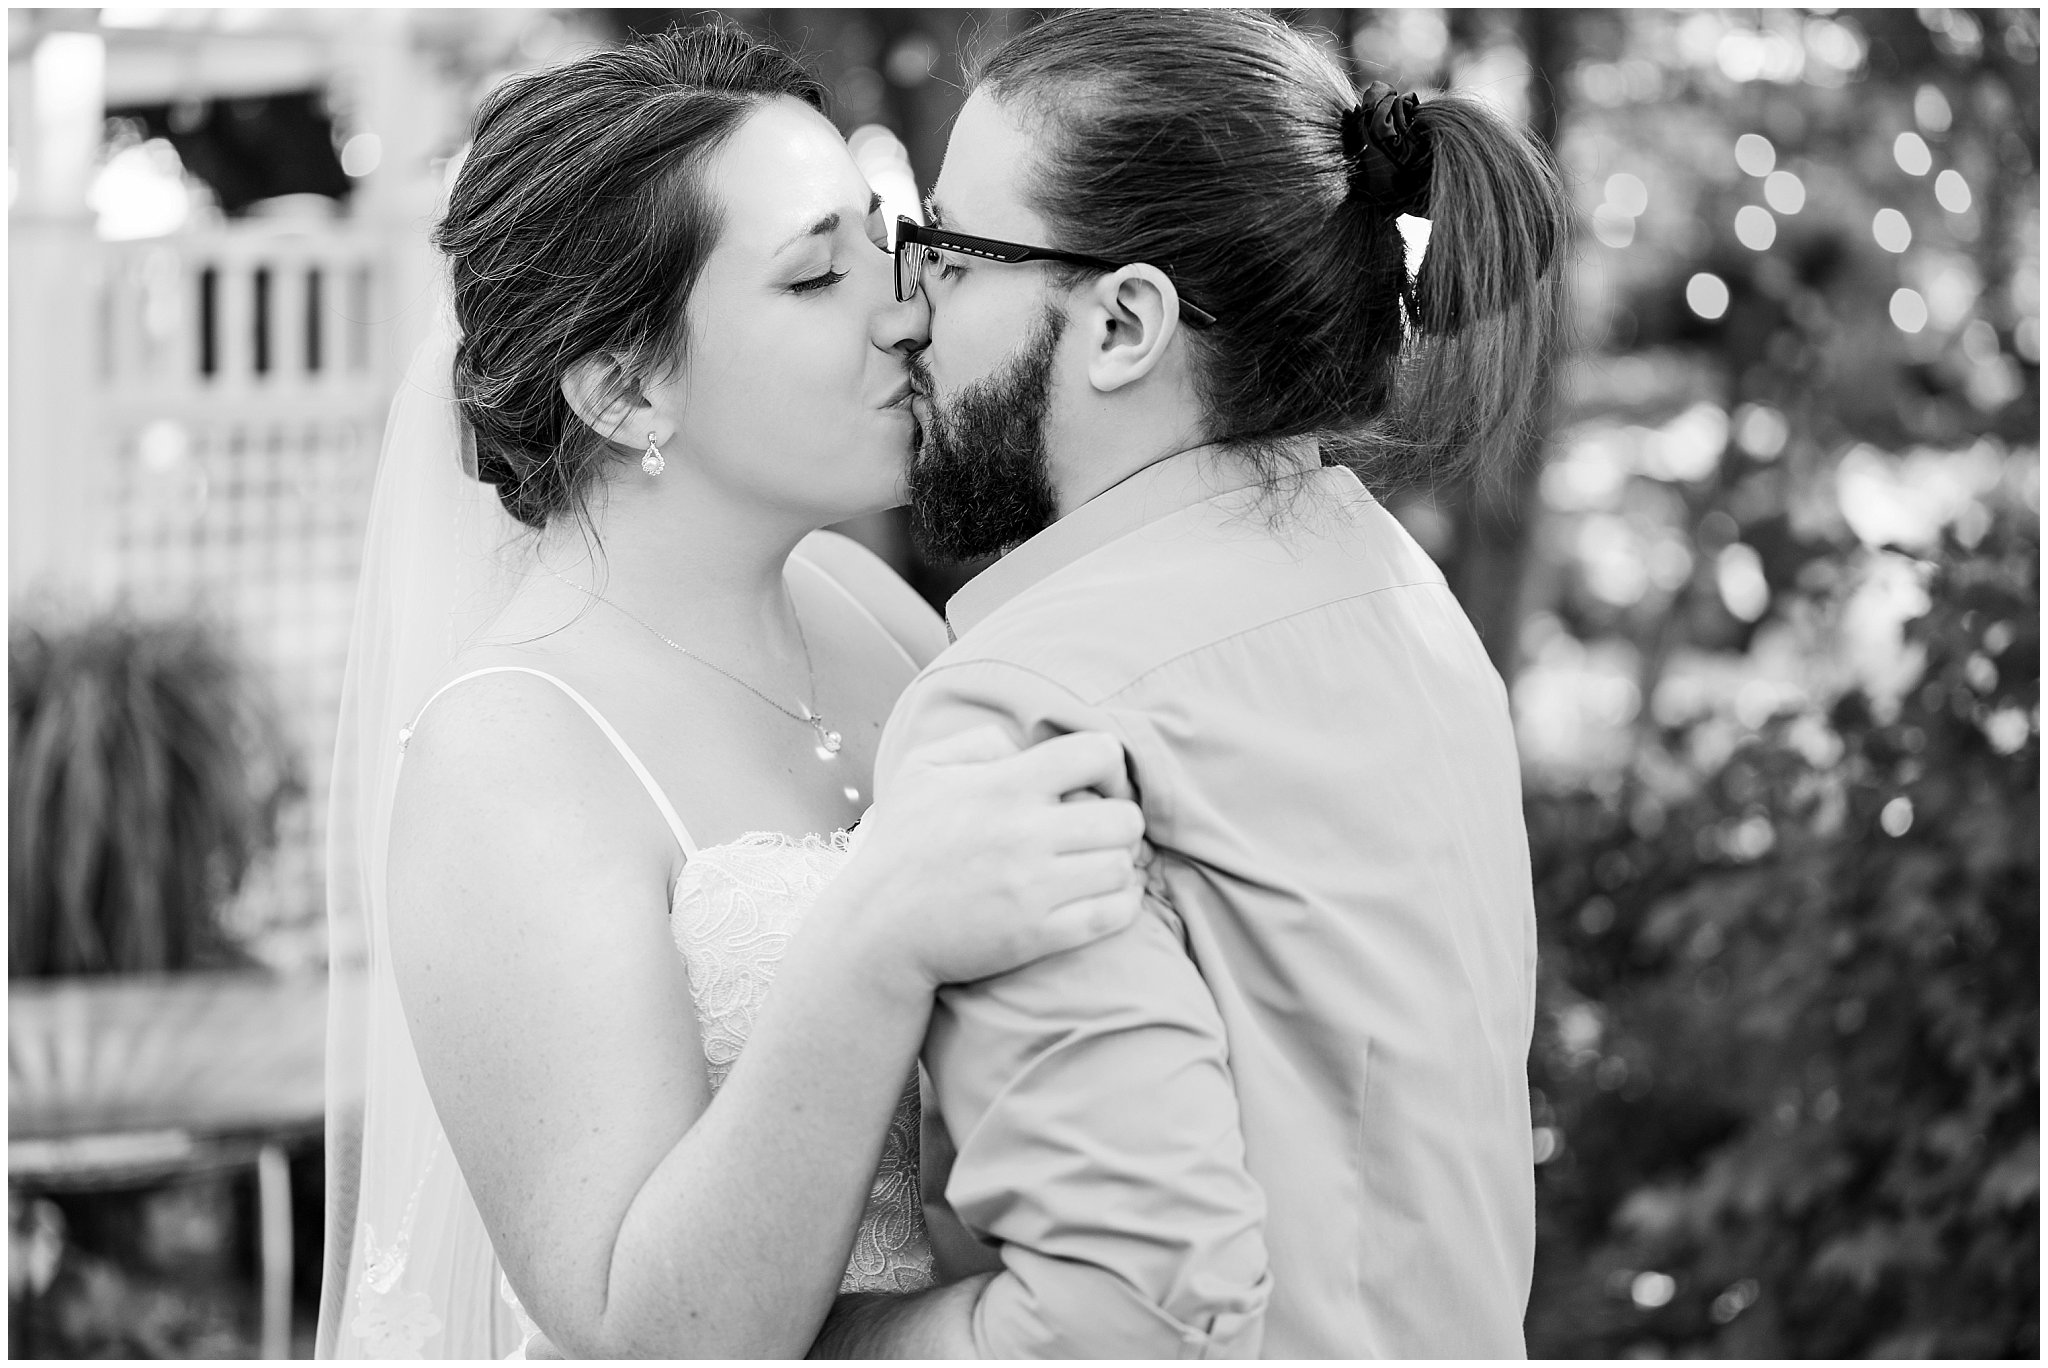 Bride and Groom sharing a moment | Intimate Utah Summer Garden Wedding | Jessie and Dallin Photography